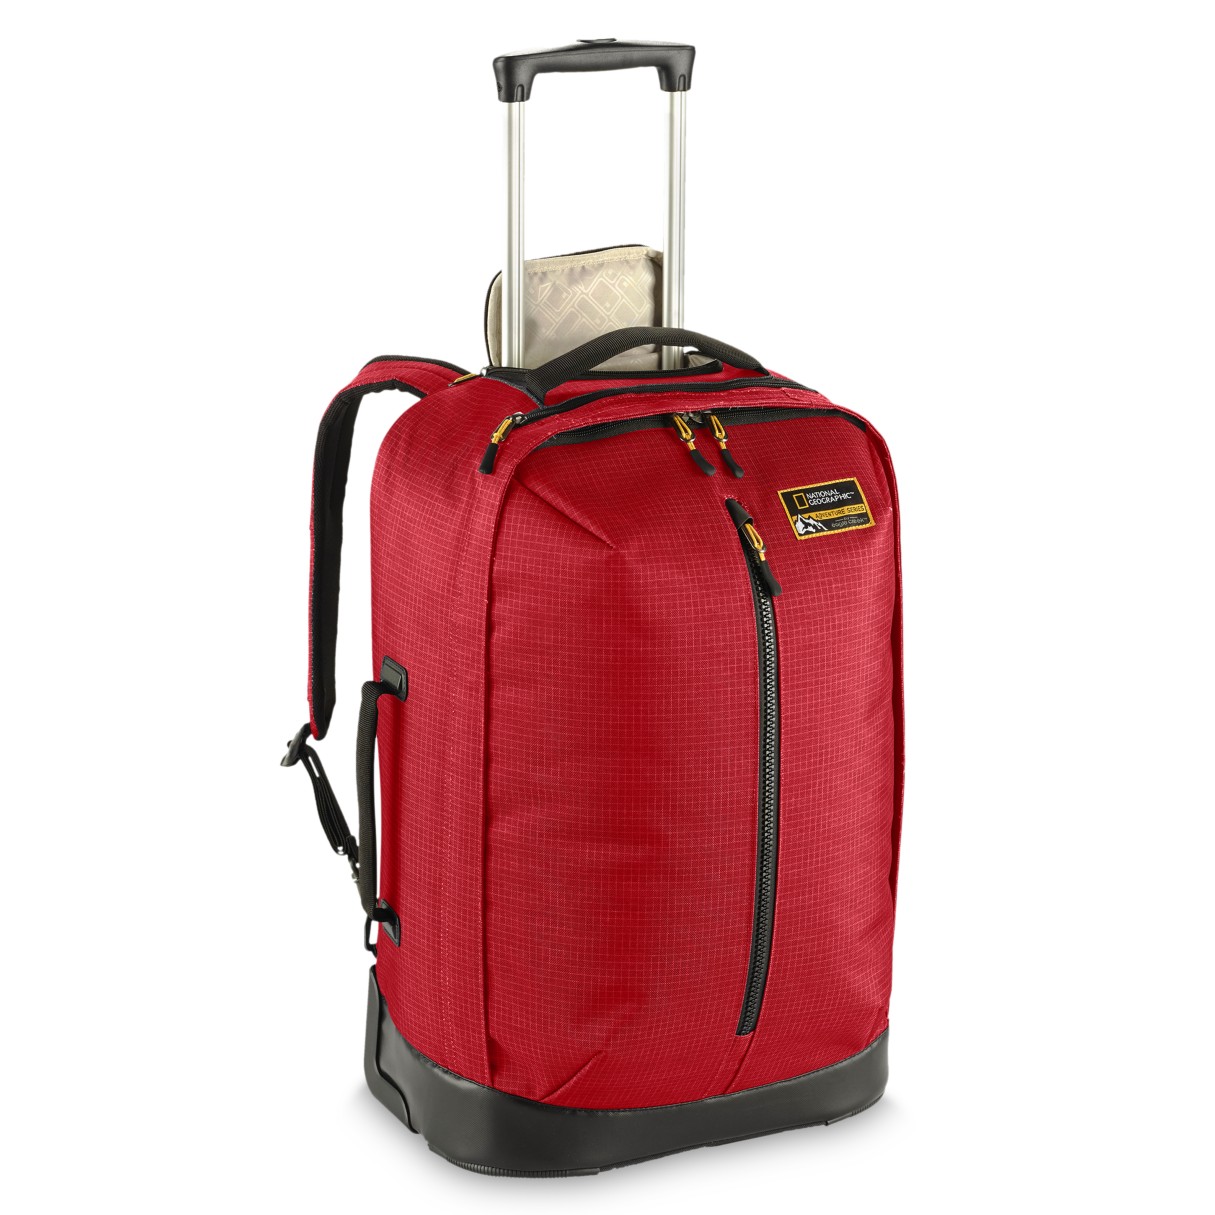 Convertible Carry-On Bag by Eagle Creek – National Geographic – Red